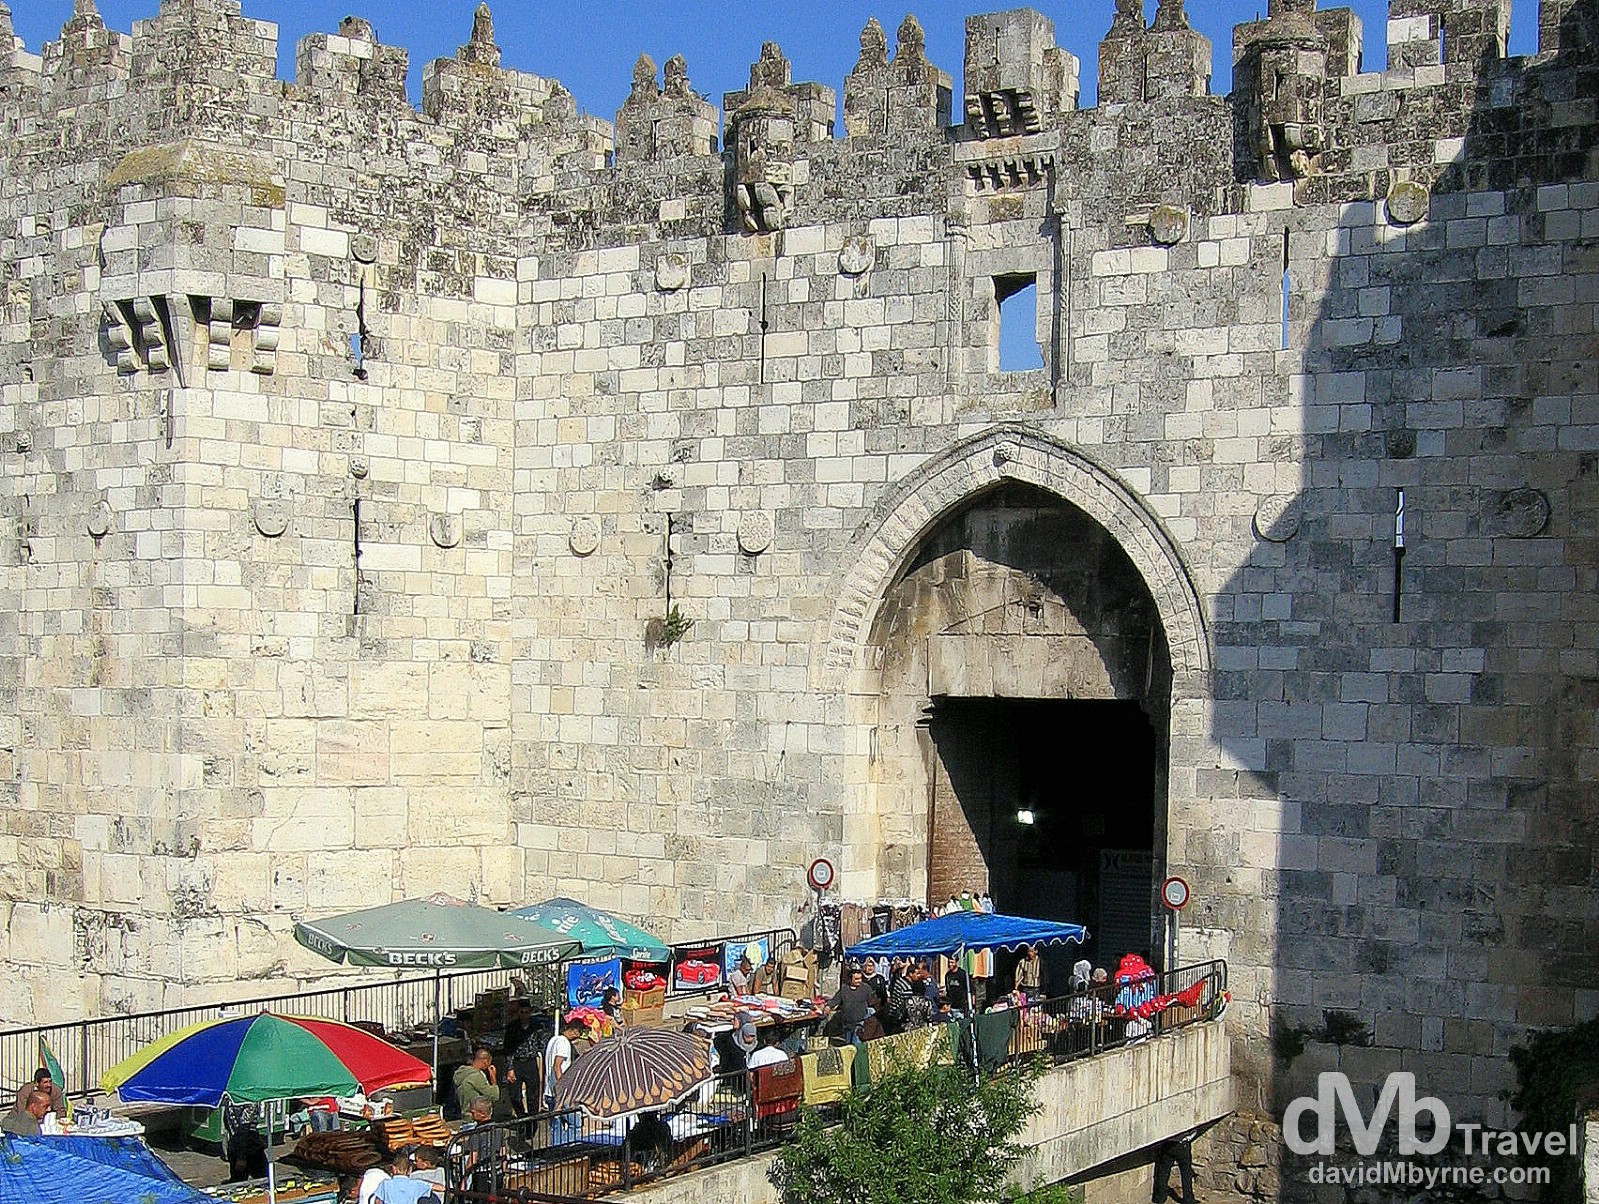 Market stalls outside the Old City wall in Jerusalem, Israel. May 2, 2008.